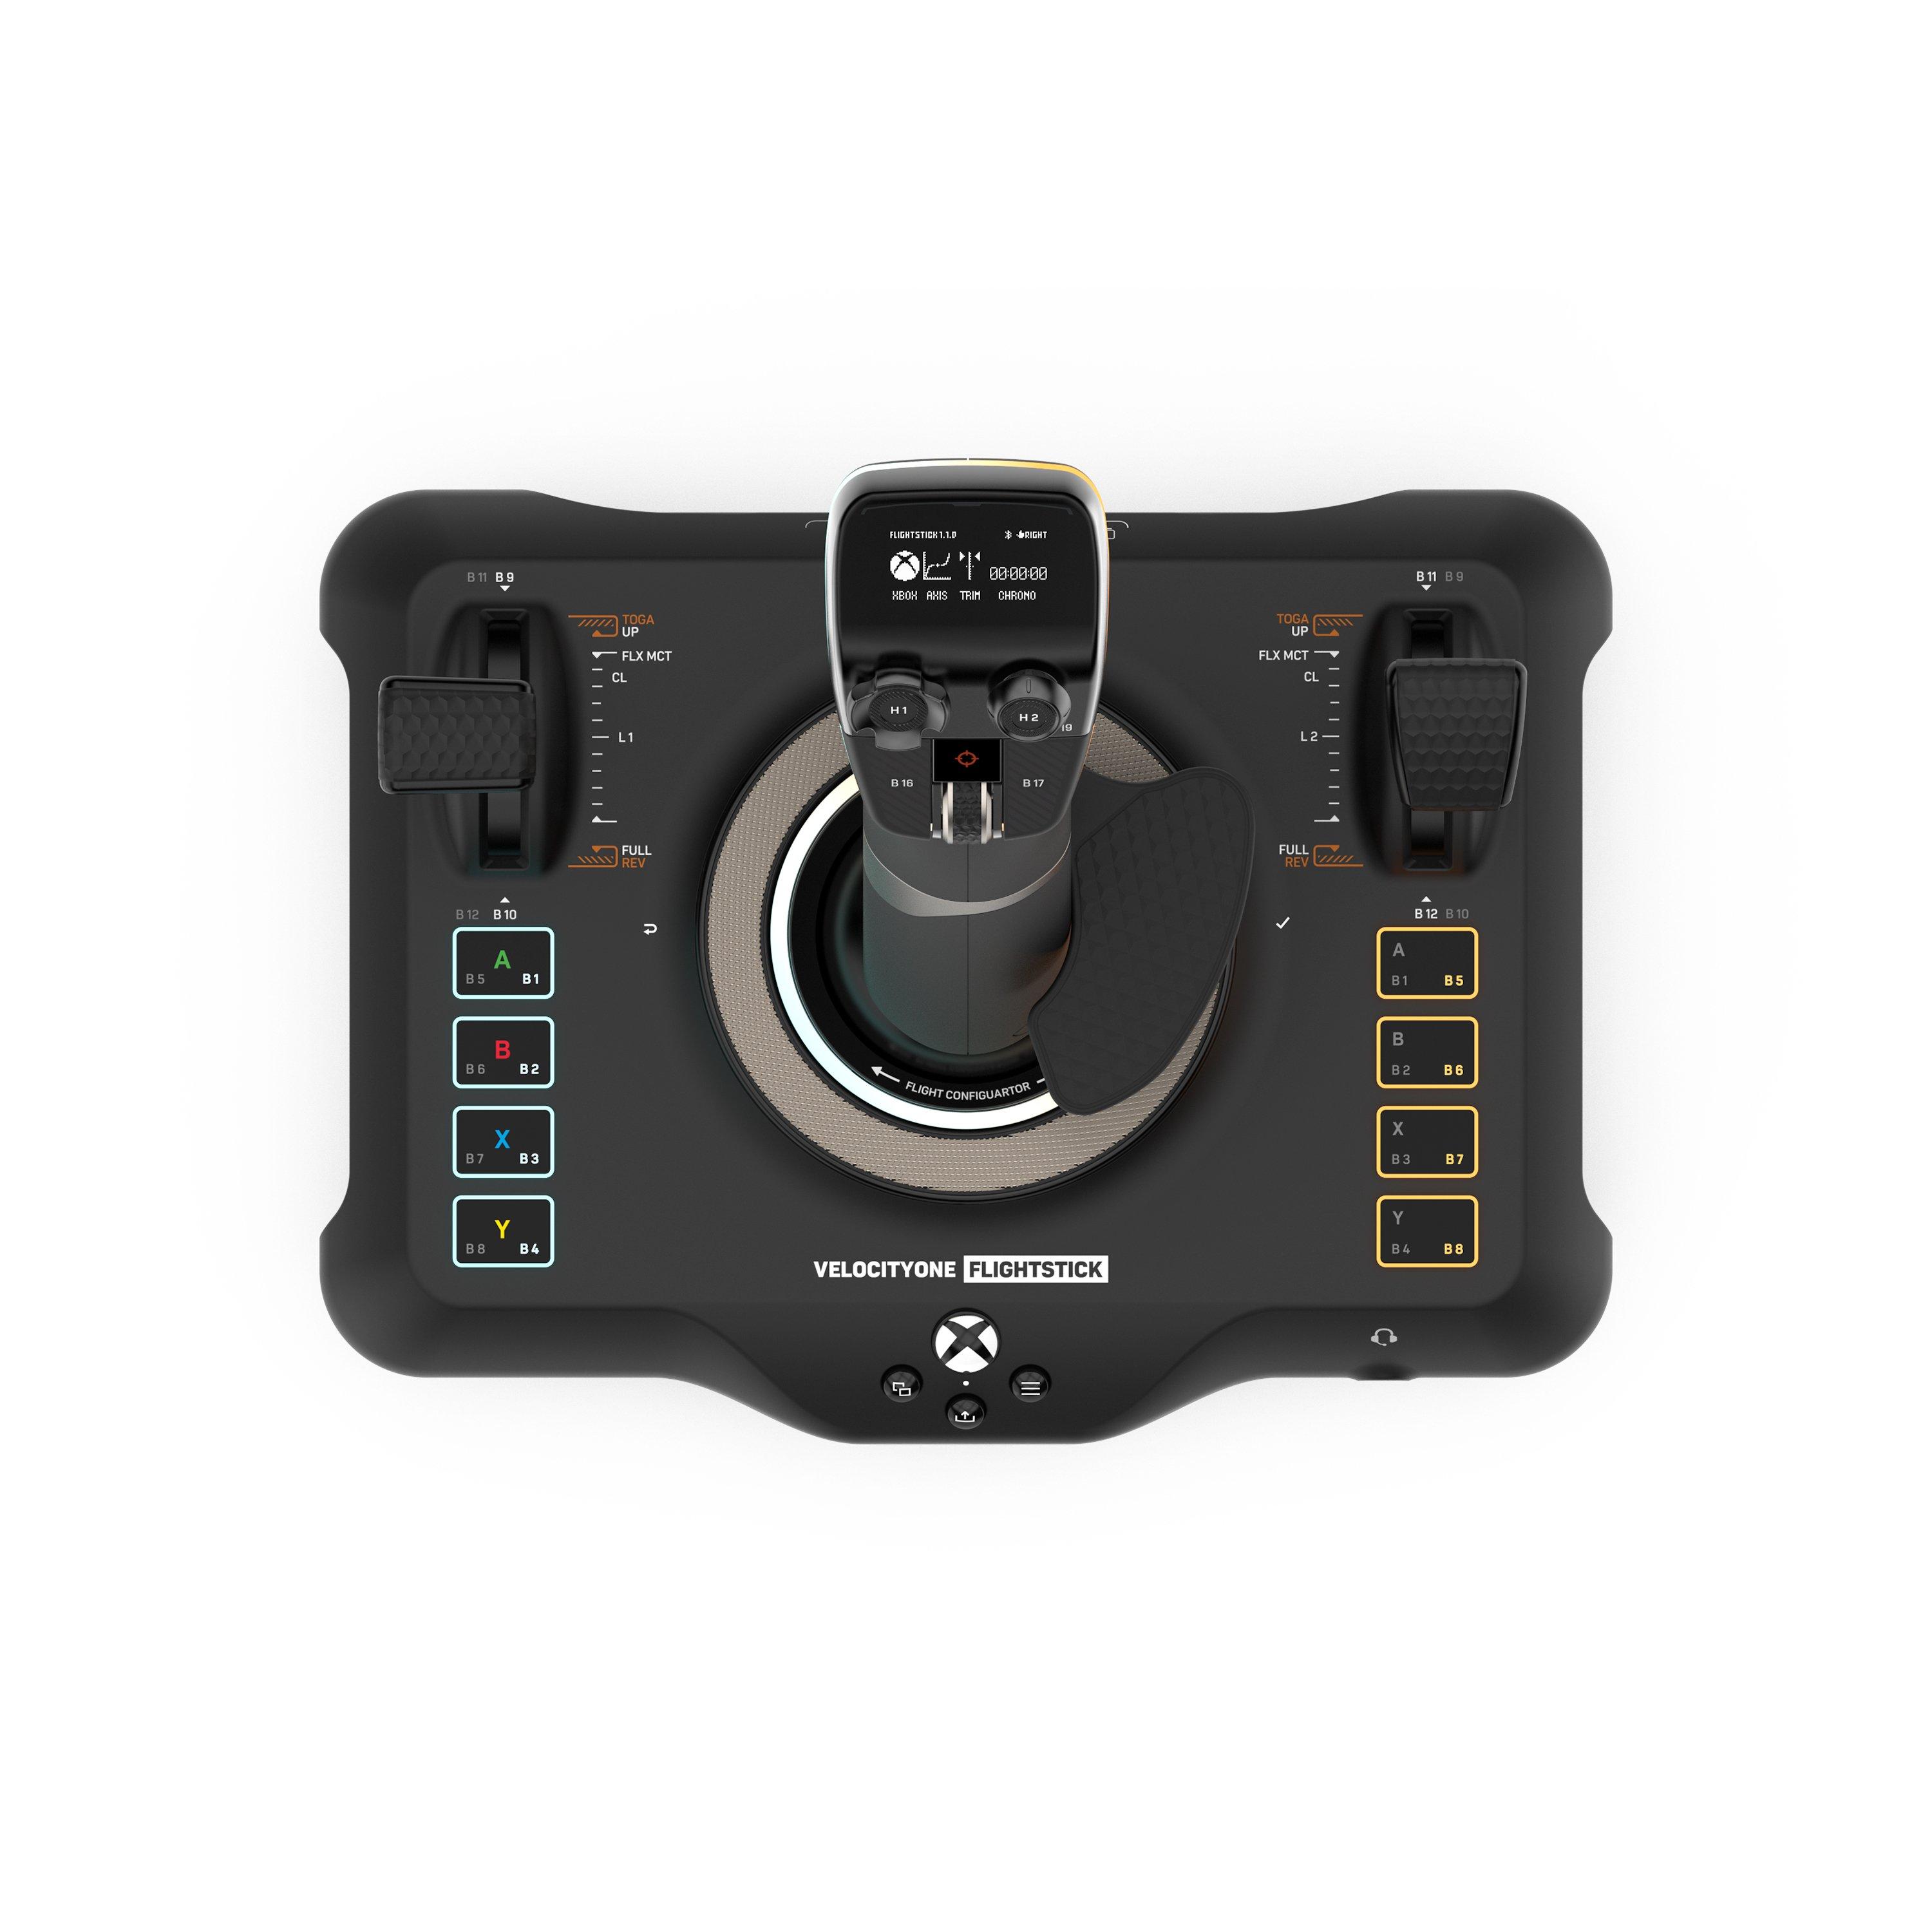 VelocityOne Flight Xbox system from Turtle Beach is here - 9to5Toys